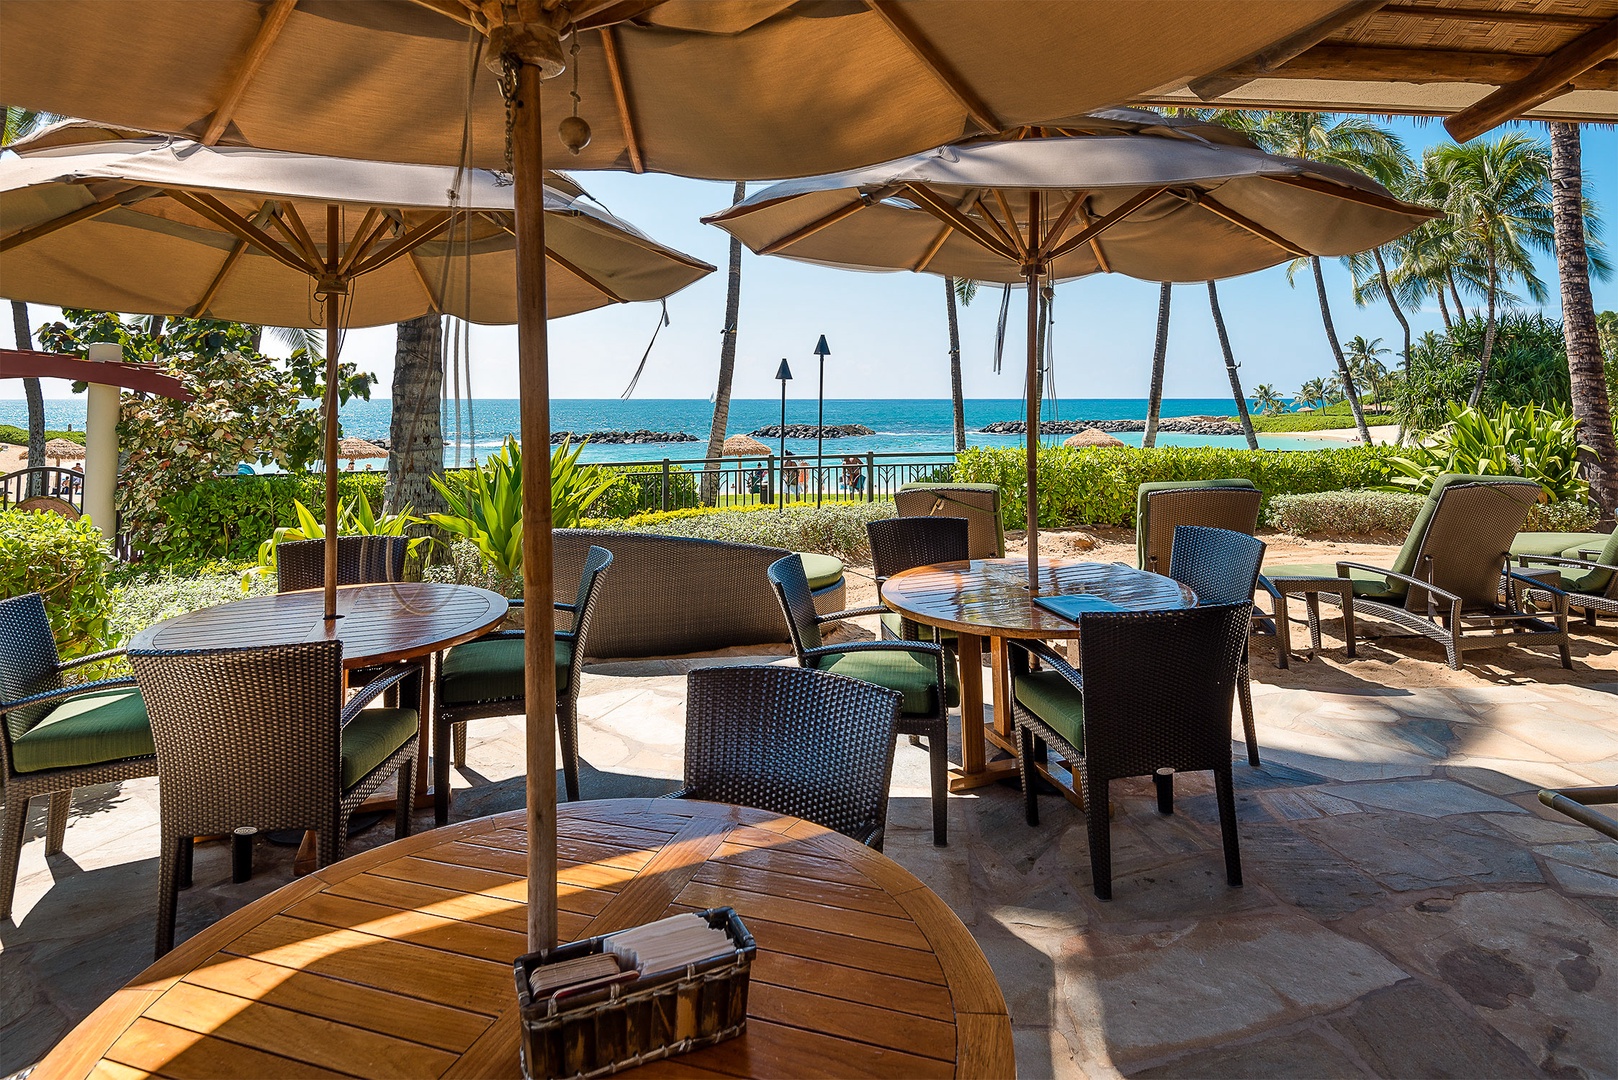 Kapolei Vacation Rentals, Ko Olina Beach Villas B403 - The on-site beach bar and dining with ocean breezes.